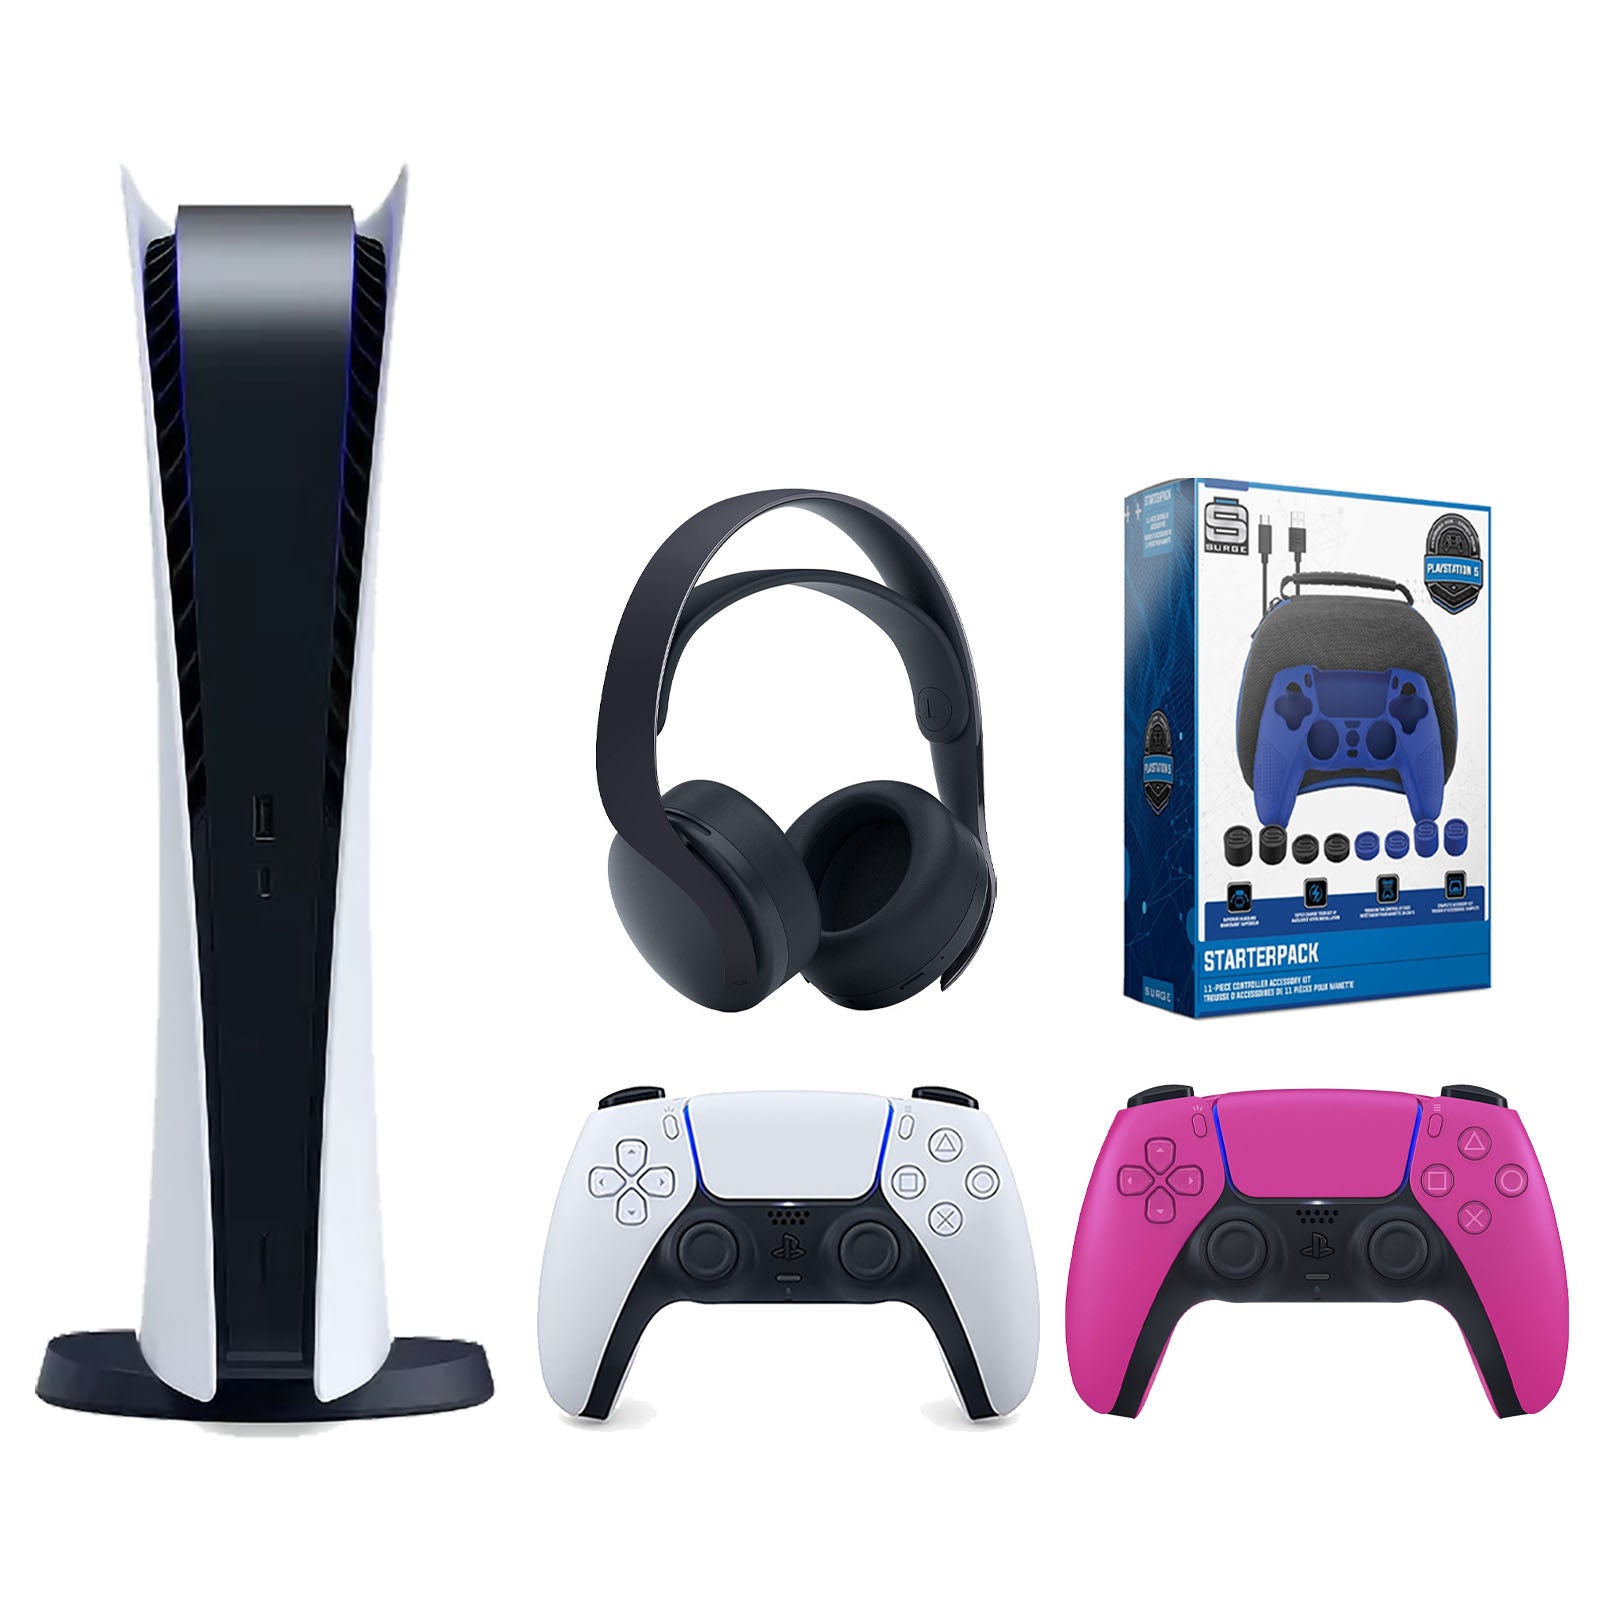 Sony Playstation 5 Digital Edition Console with Extra Pink Controller, Black PULSE 3D Headset and Surge Pro Gamer Starter Pack 11-Piece Accessory Bundle - Pro-Distributing